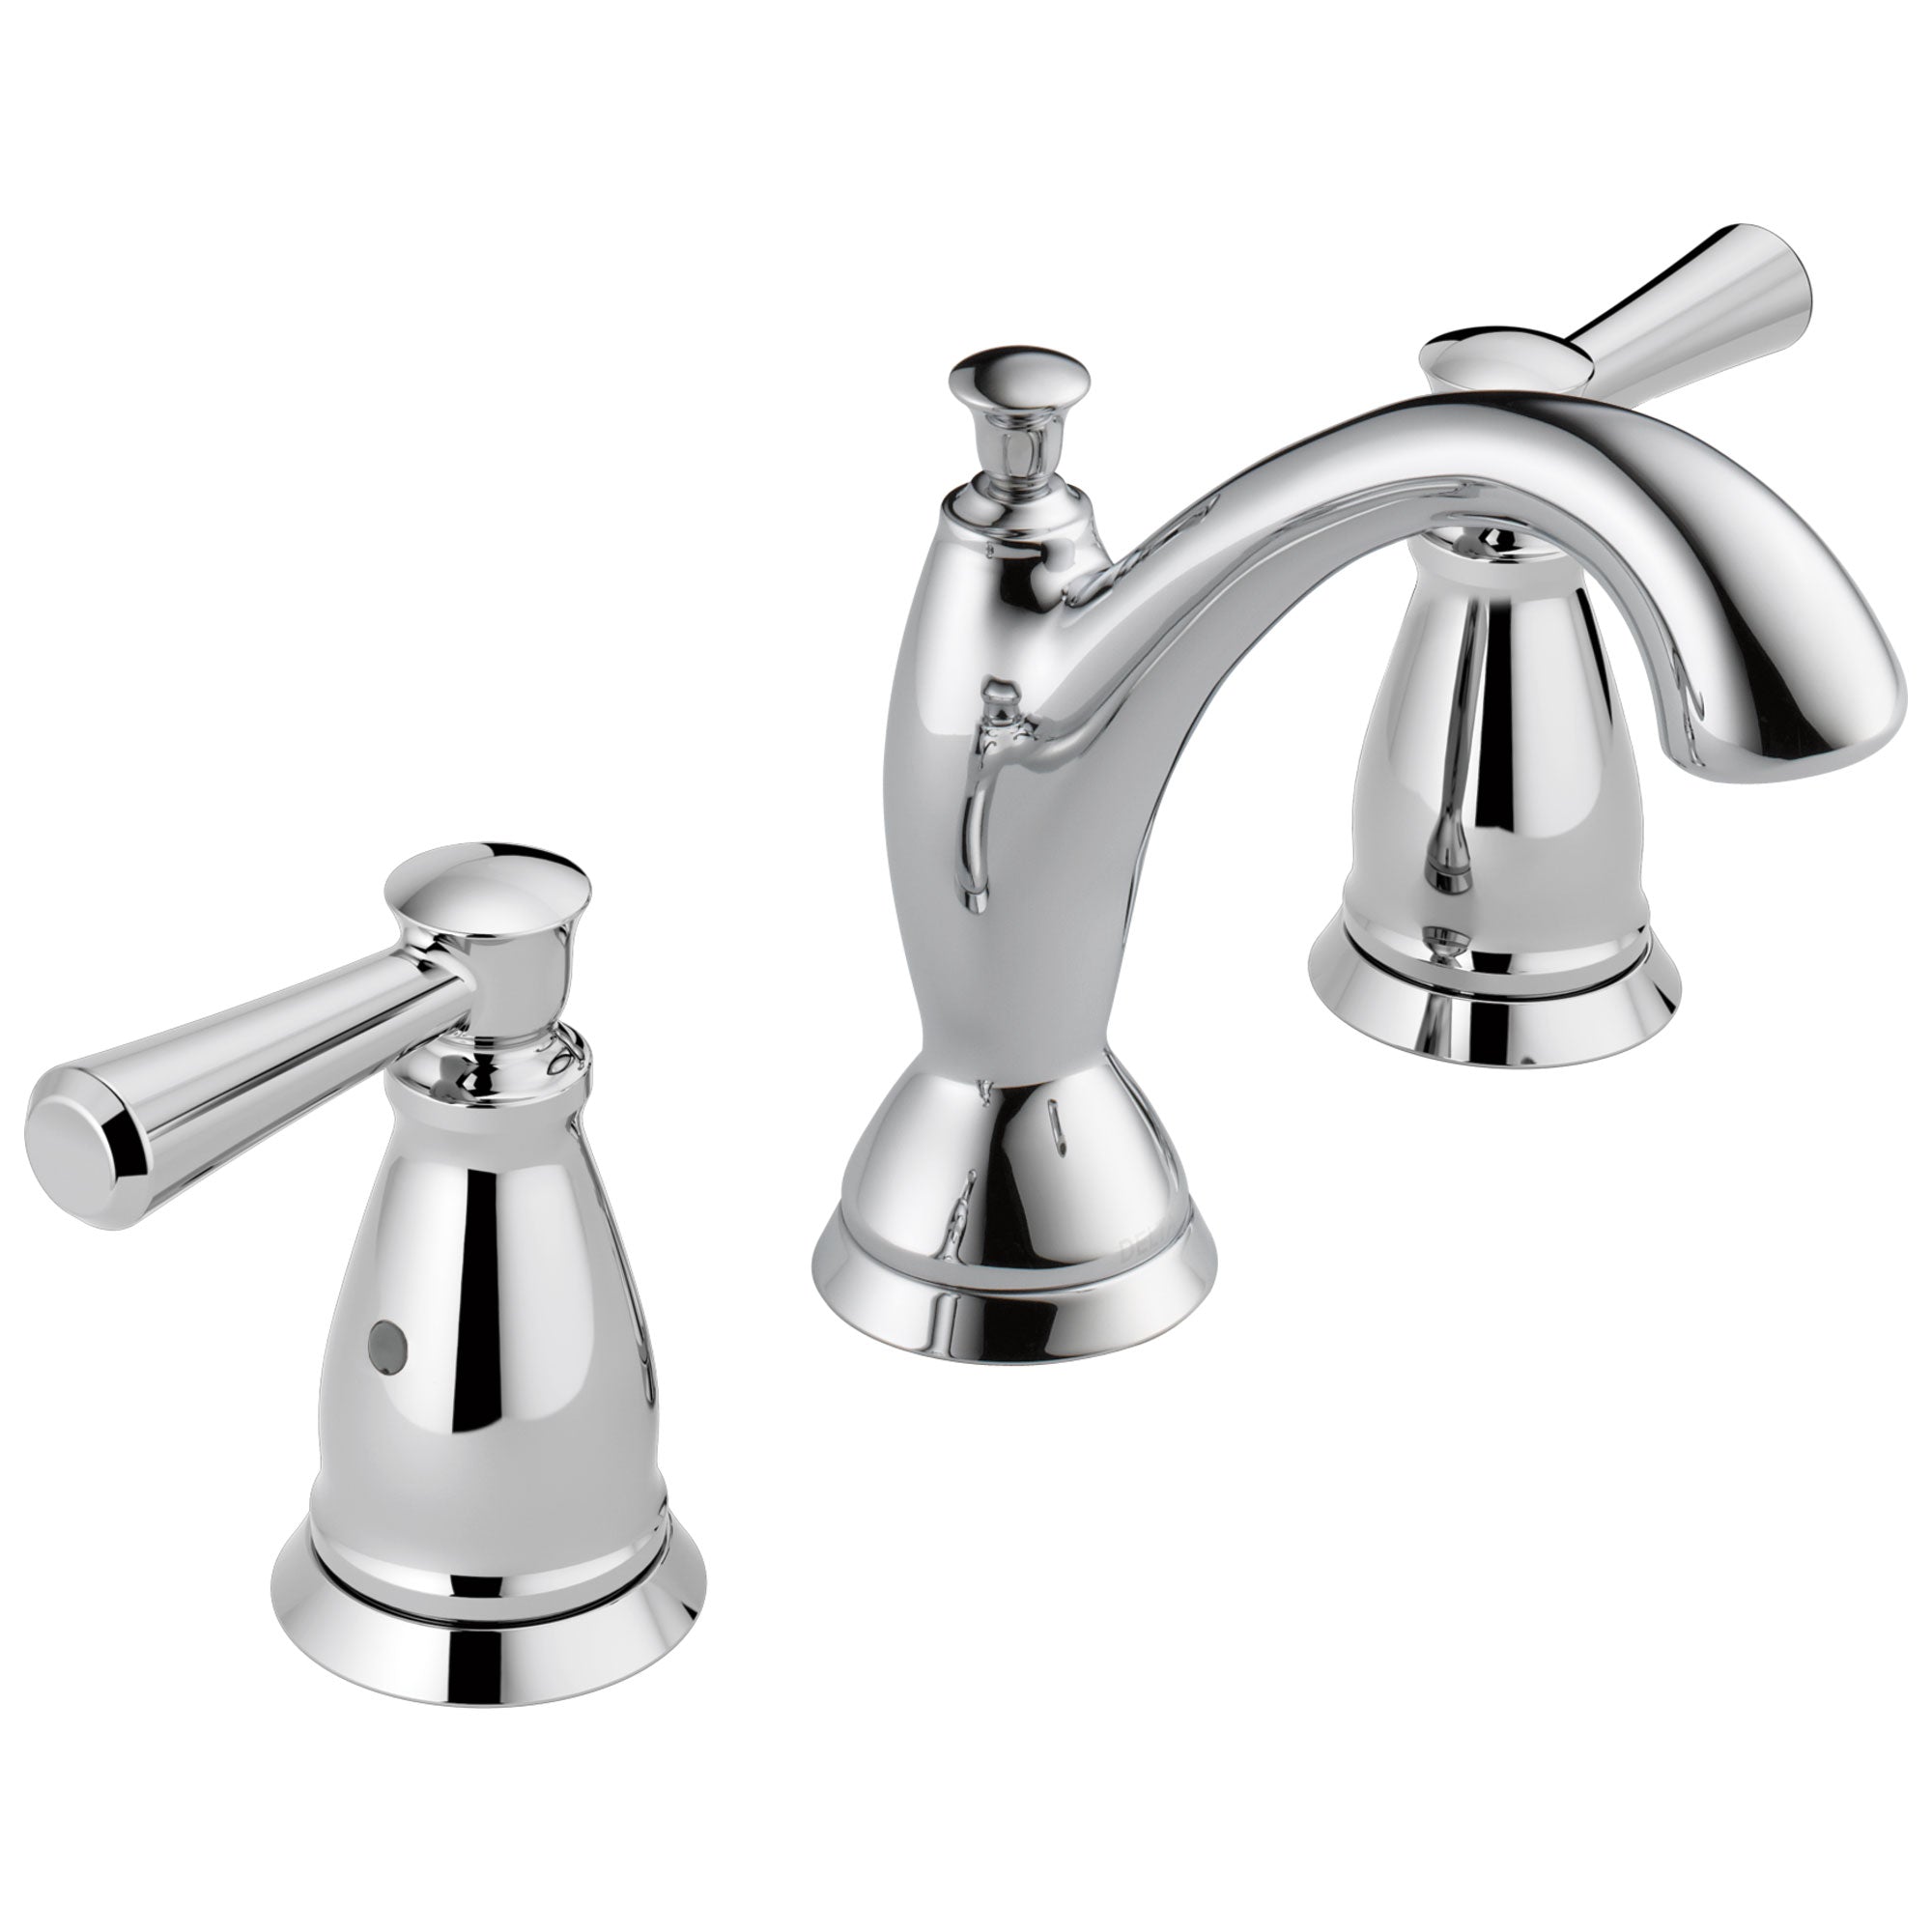 Delta Linden Collection Chrome Finish Two Handle Widespread Lavatory Bathroom Sink Faucet with Metal Pop-up Drain D3593MPUDST